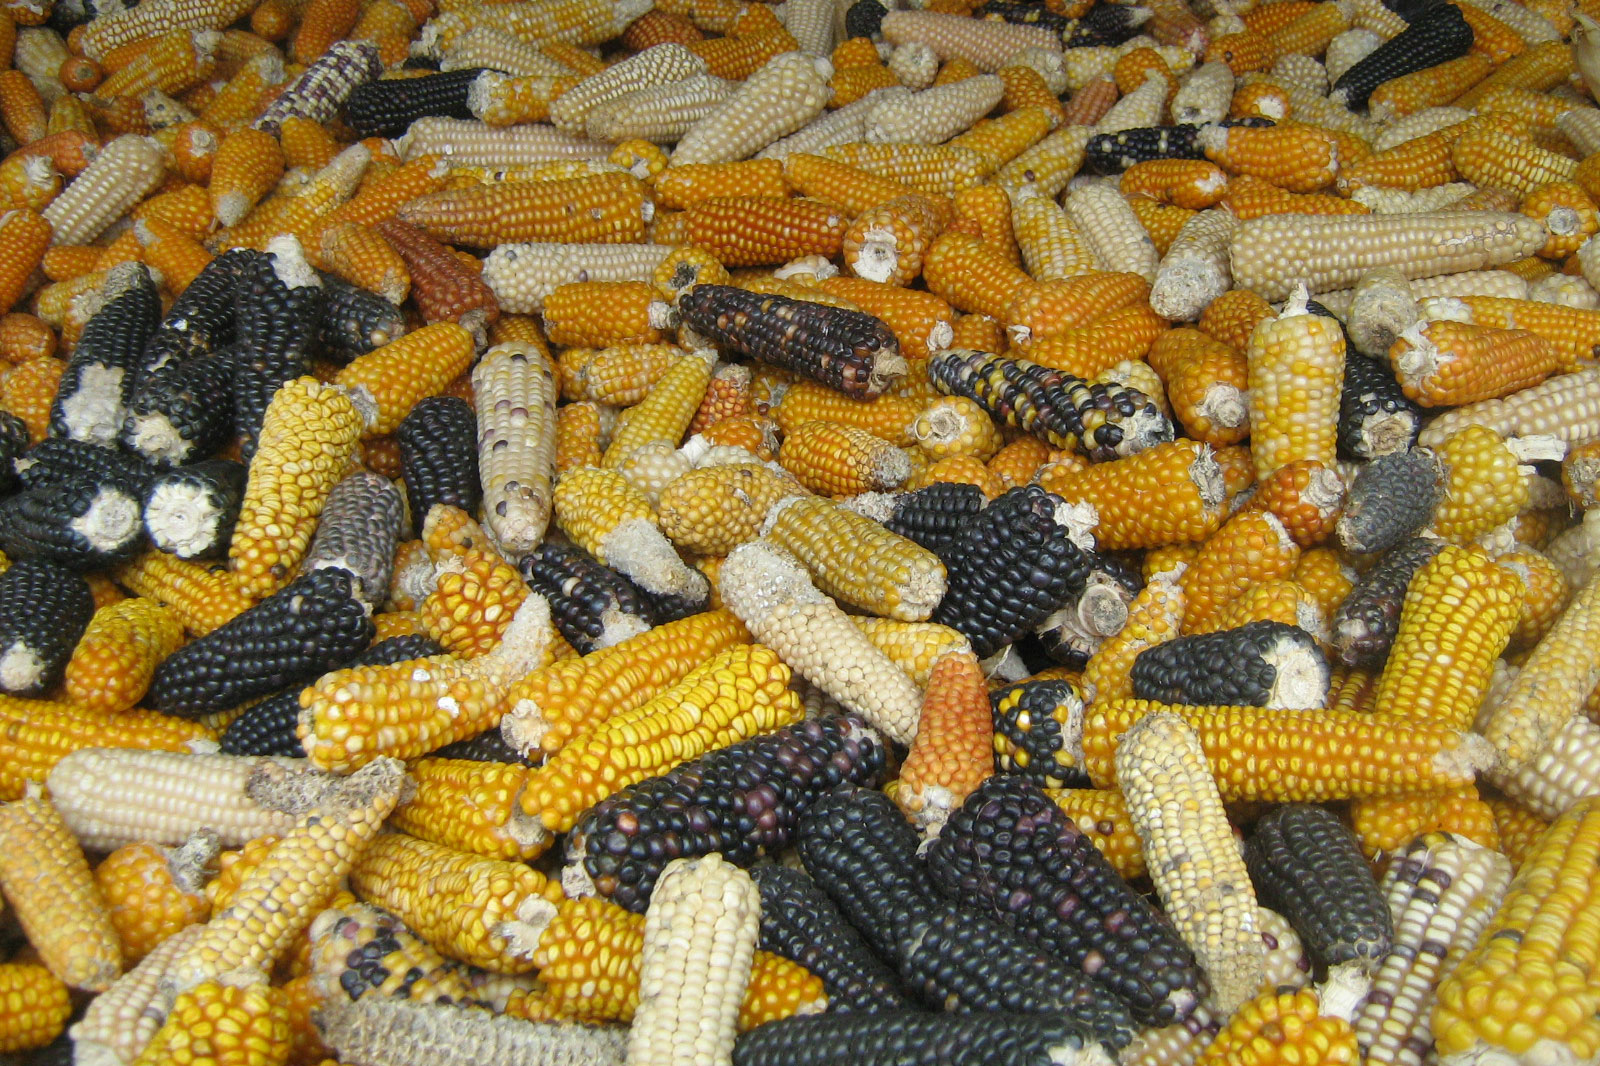 Photograph of a pile of maize ears. The photo shows maize ears with grains varying from beige to bright yellow to nearly black mixed together.